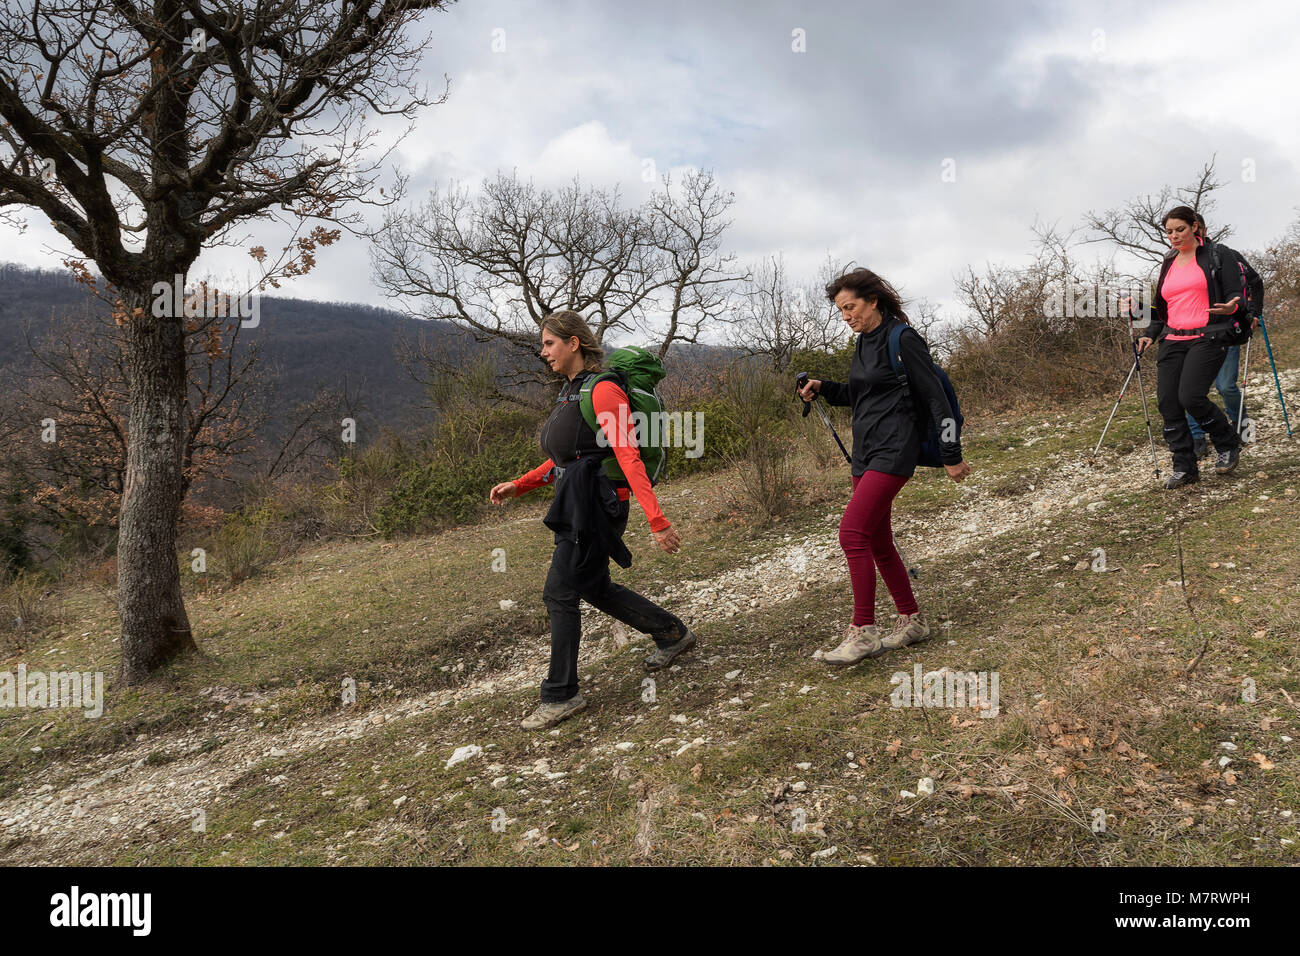 Monte San Giovanni in Sabina, Italy - March 10, 2018: A group of hikers explore mountain paths, among oak and holm oak woods. The scene is composed of Stock Photo